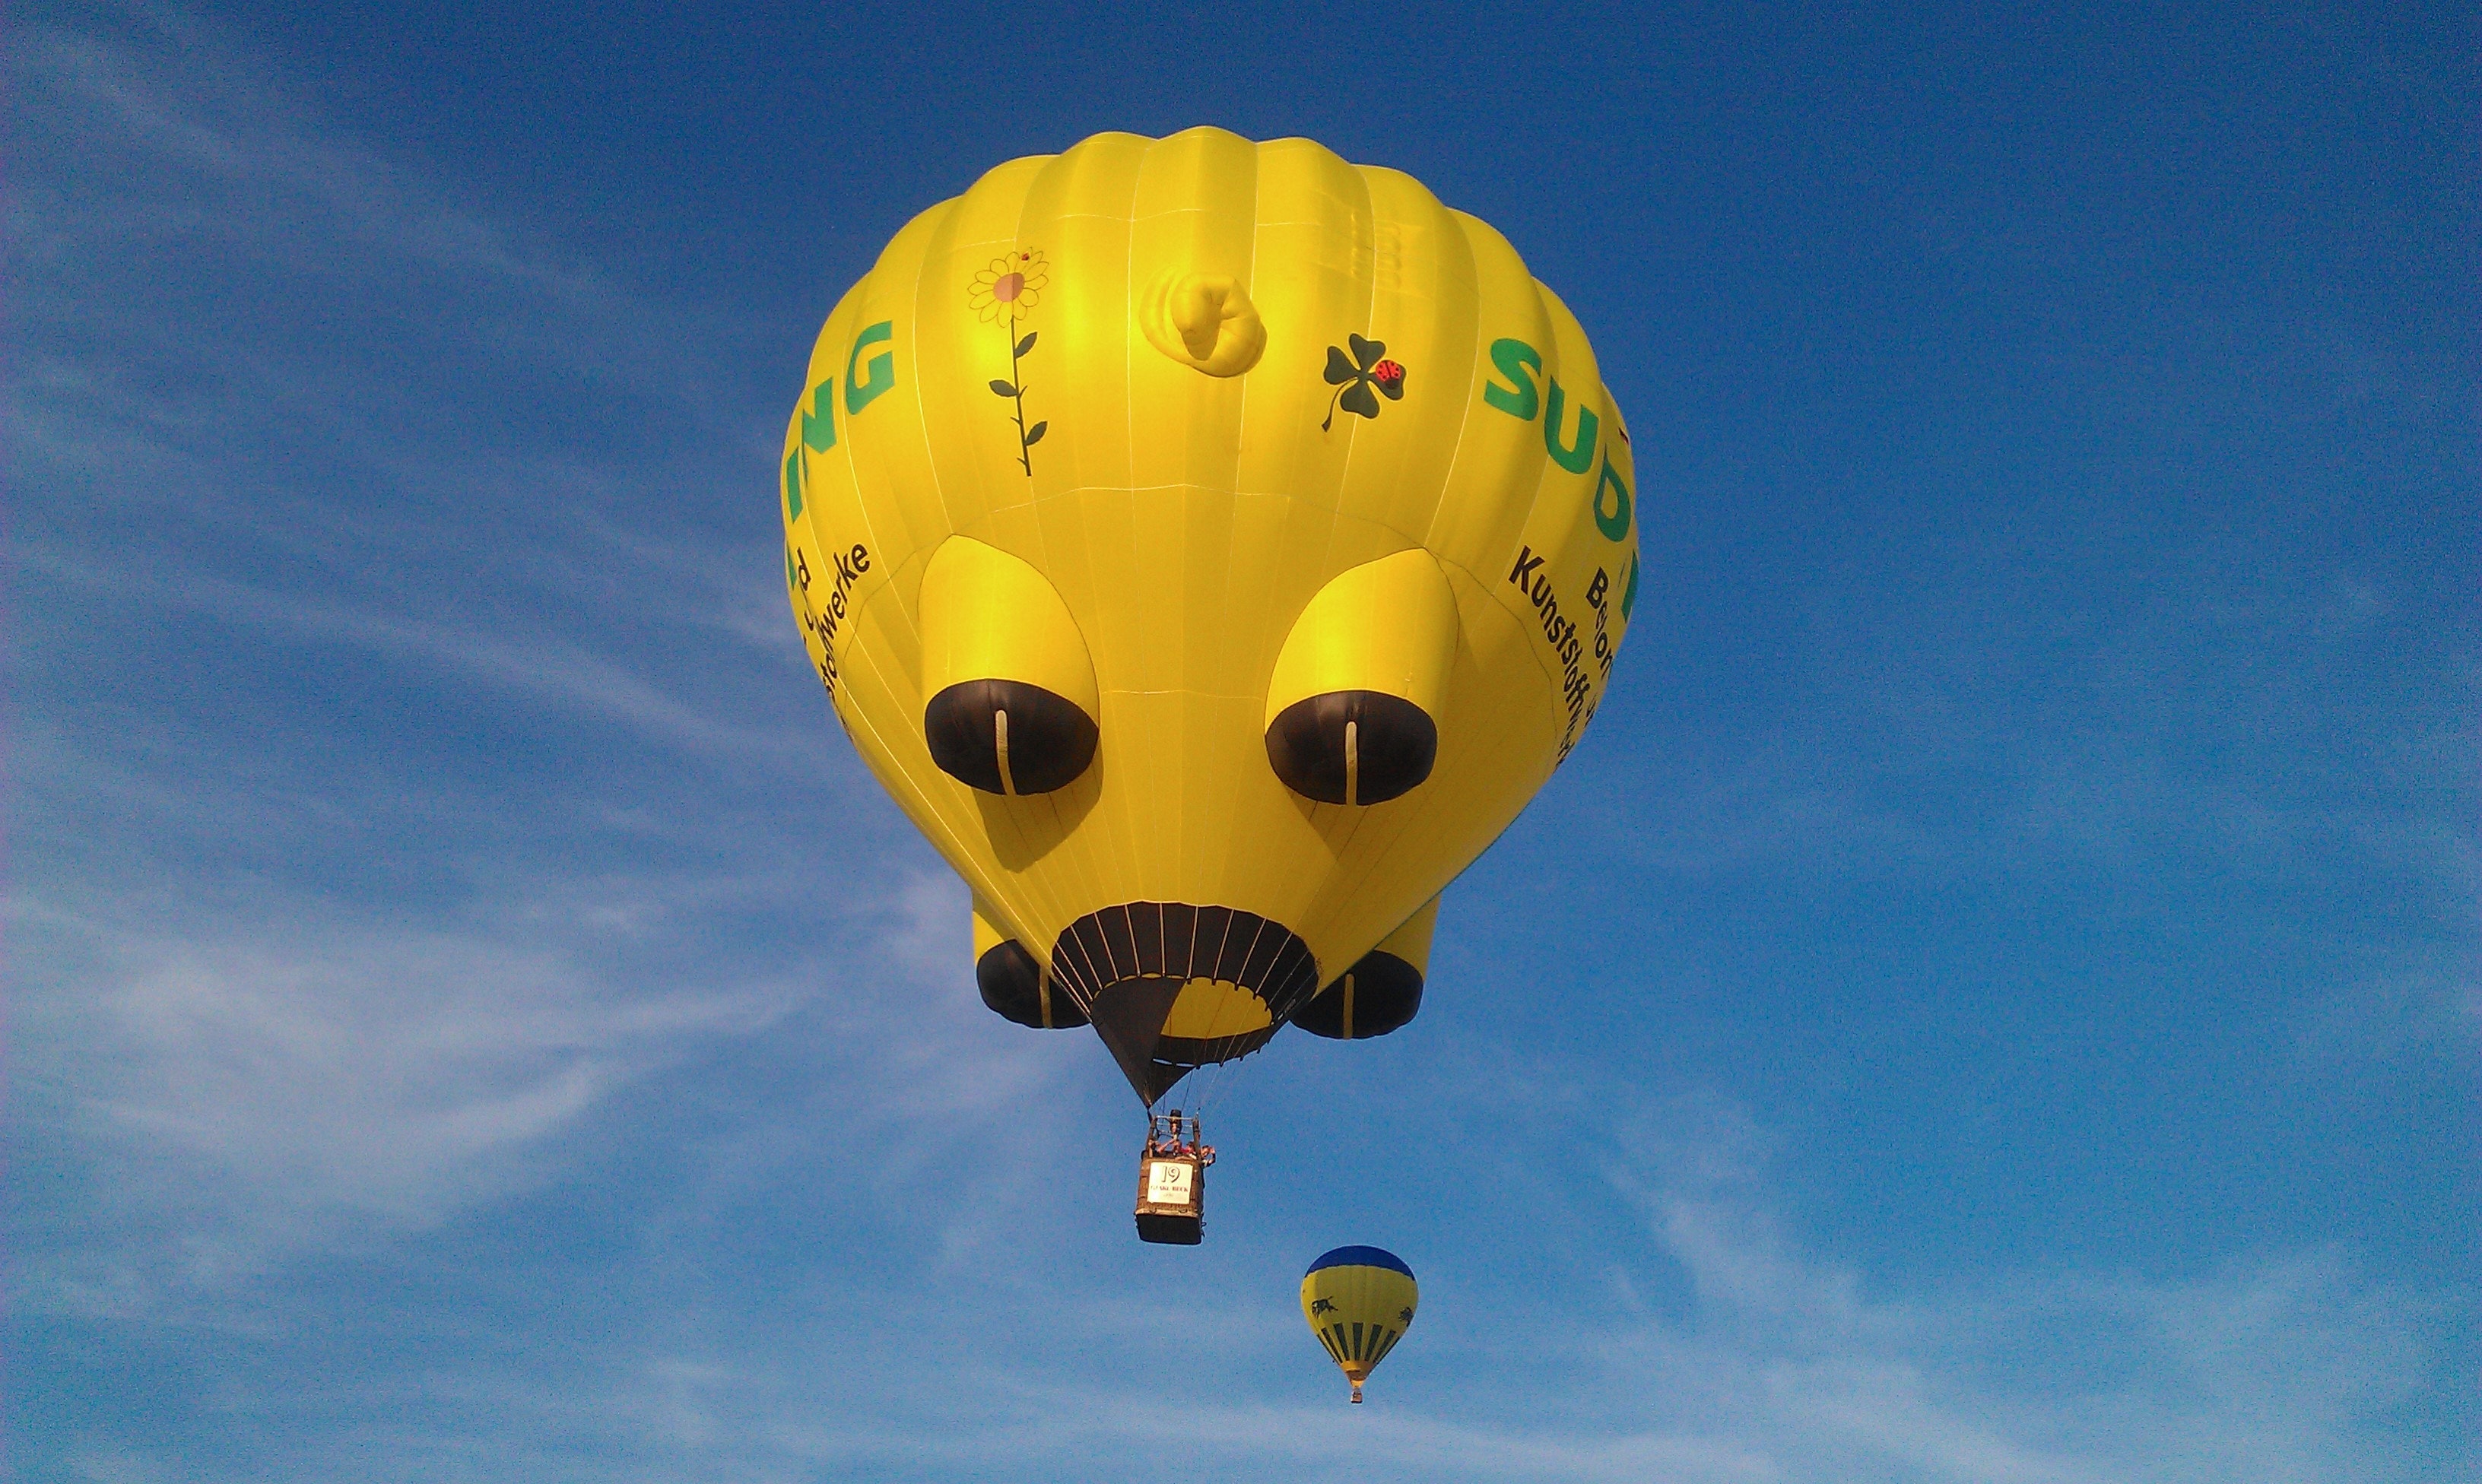 Yellow and black hot air balloons on mid air under white clouds blue sky during daytime photo